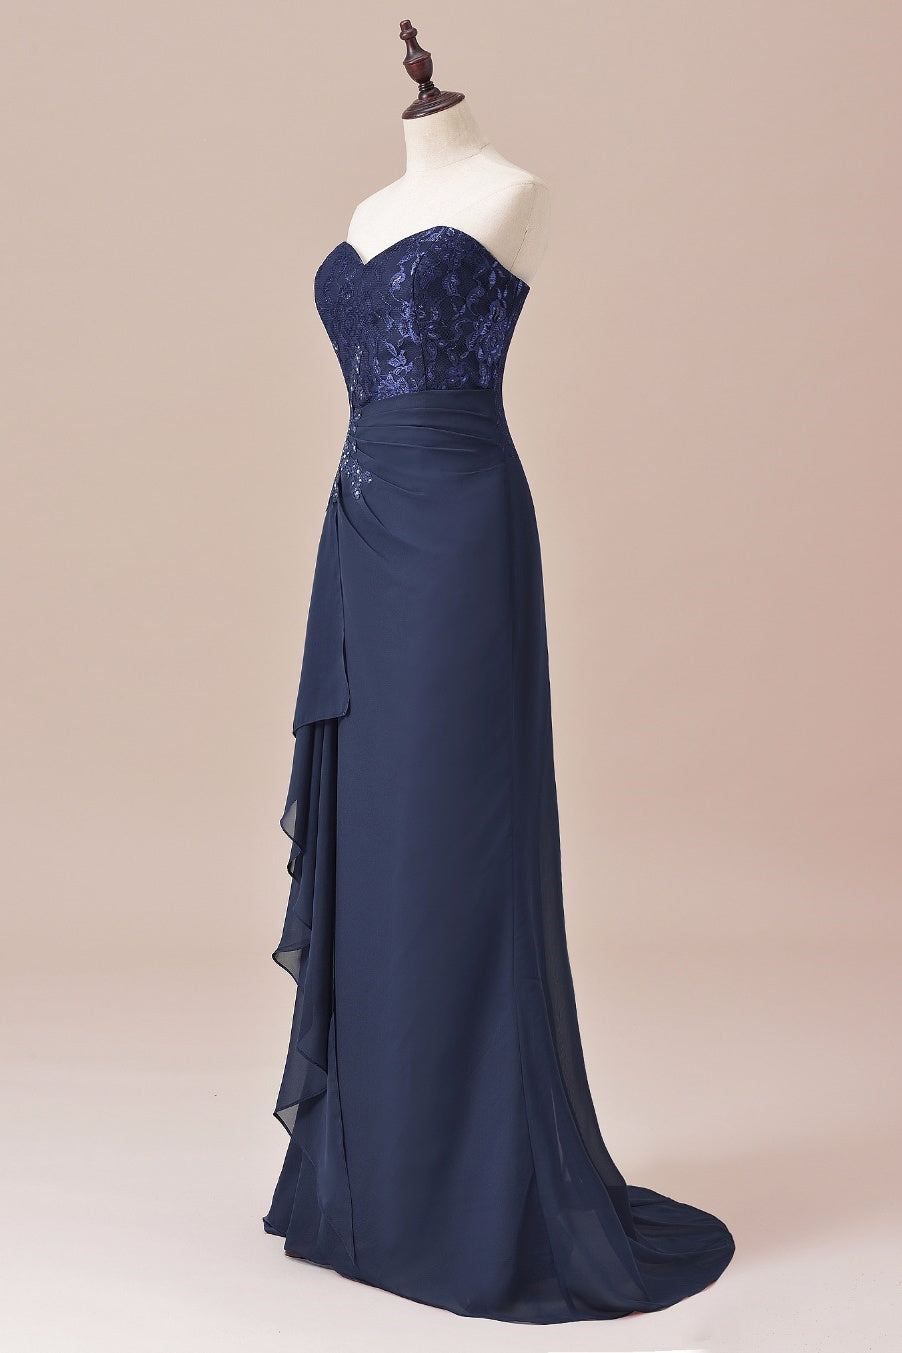 Formal Dresses Shop, Navy Blue Two-Piece Sweetheart Ruffled Long Mother of the Bride Dress